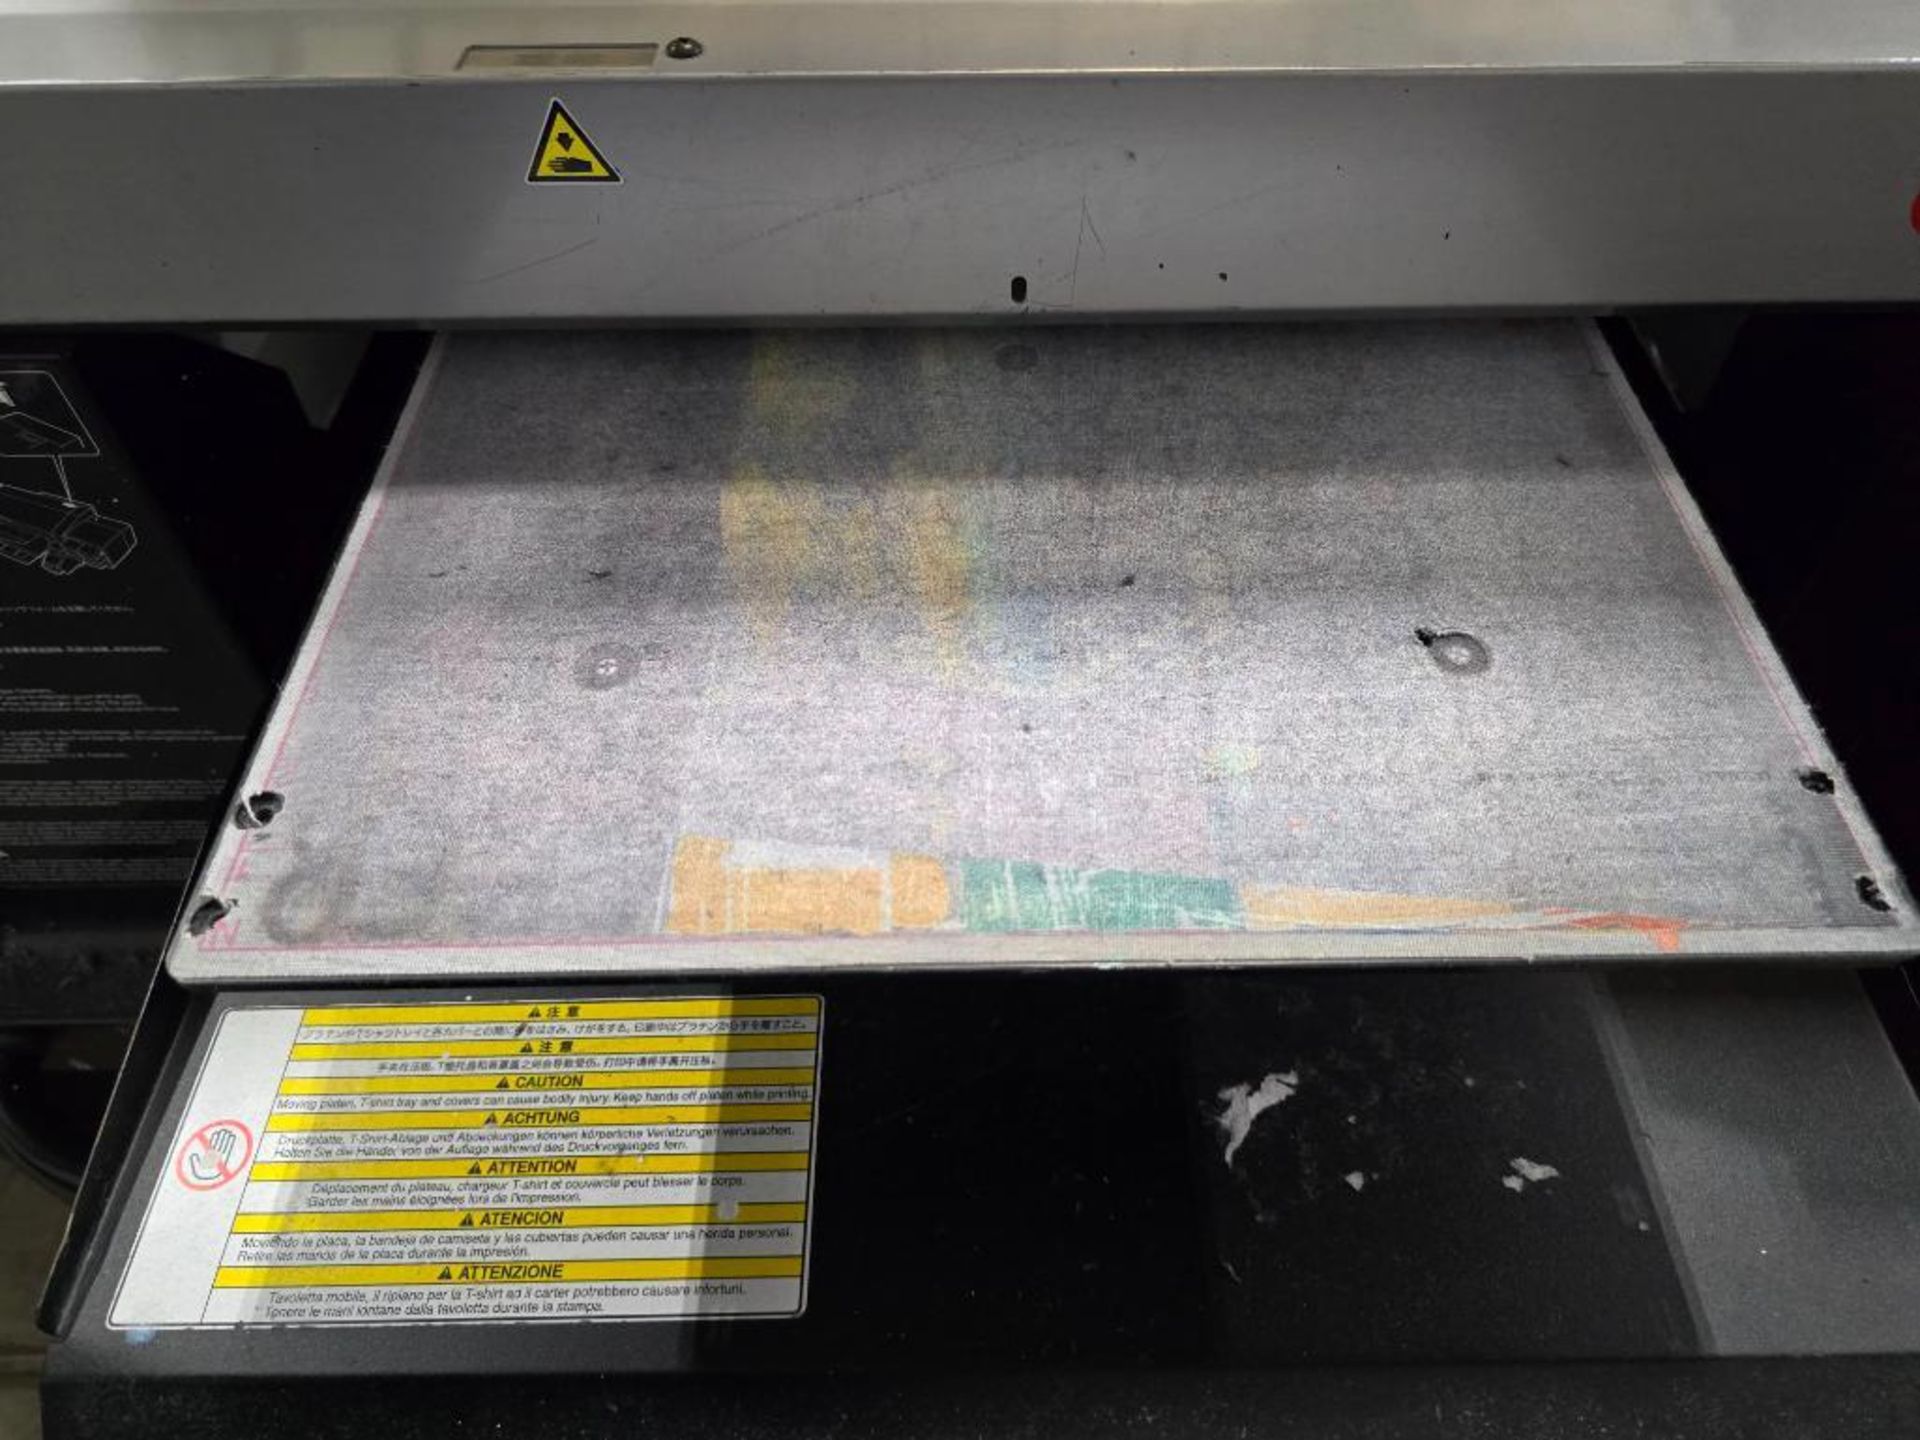 2018 Brother GTX-422 DTG (Direct to Garment) Printer, Twin Head, 6-Color, Textile & Water Based Pigm - Image 6 of 7